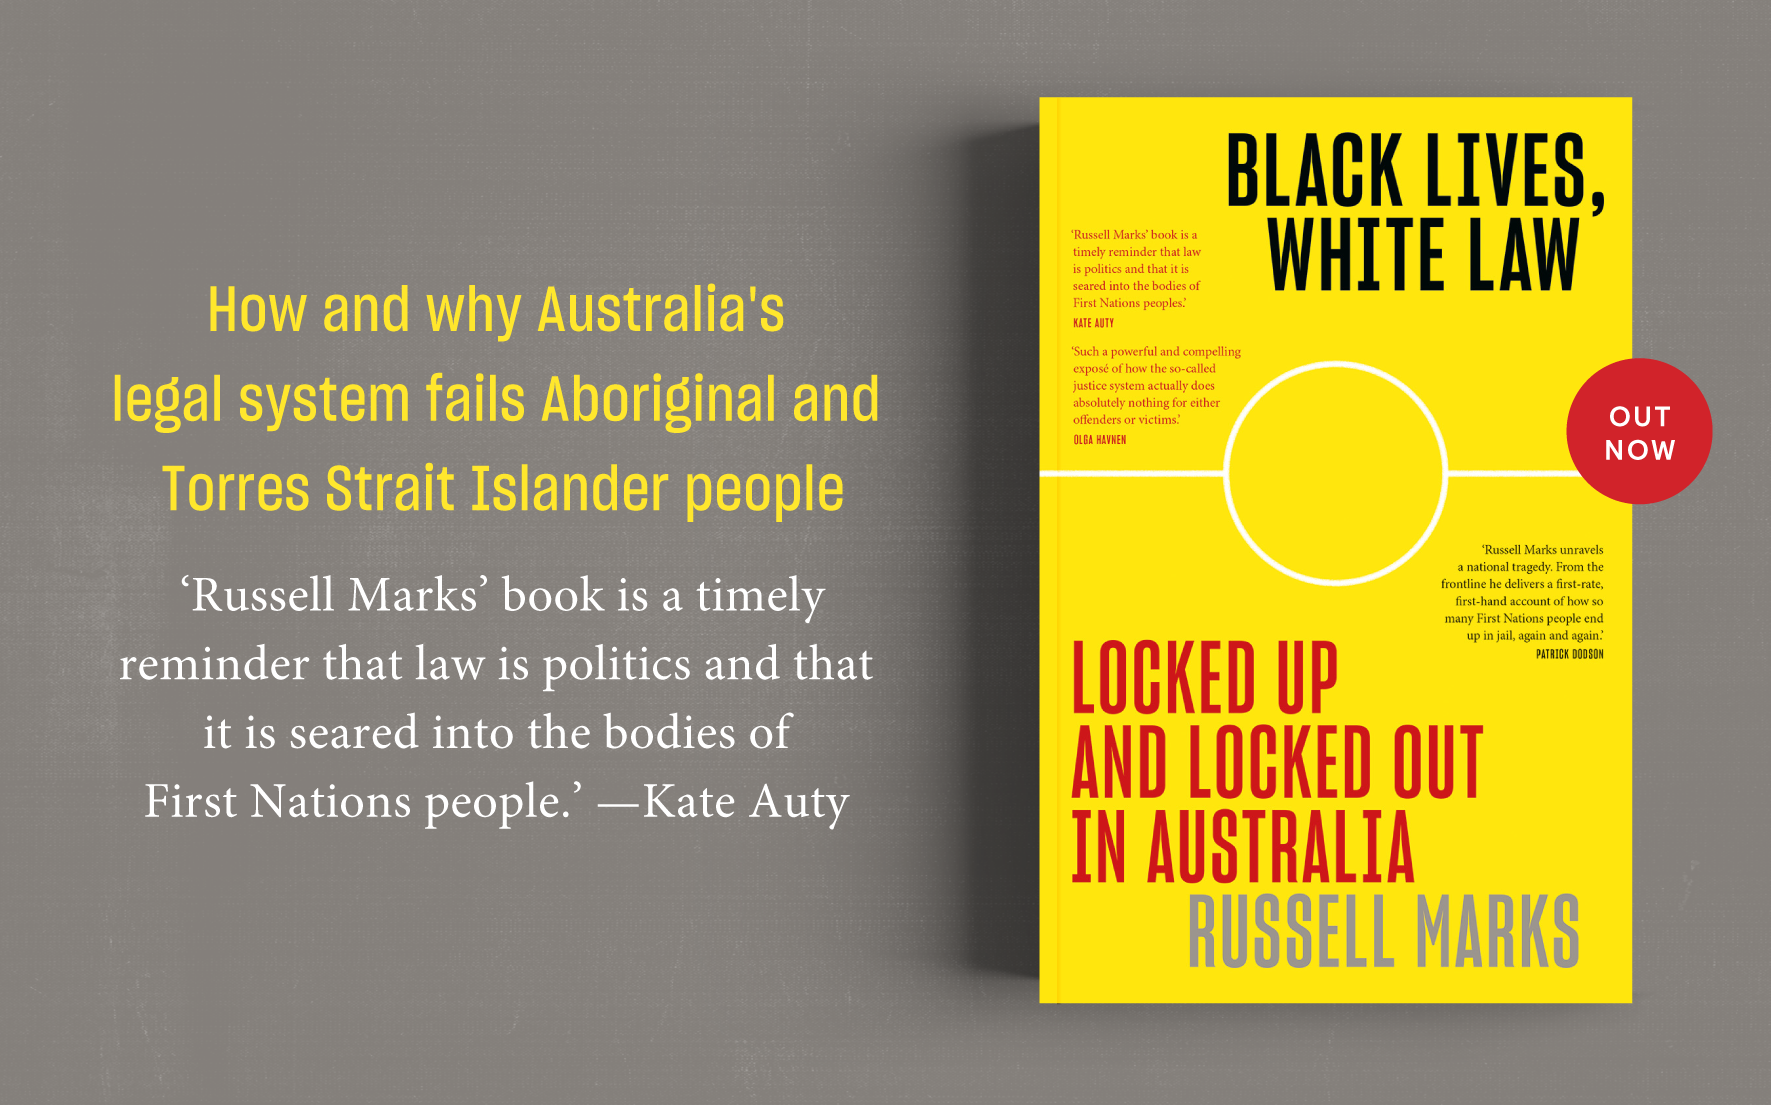 Out now: Black Lives, White Law